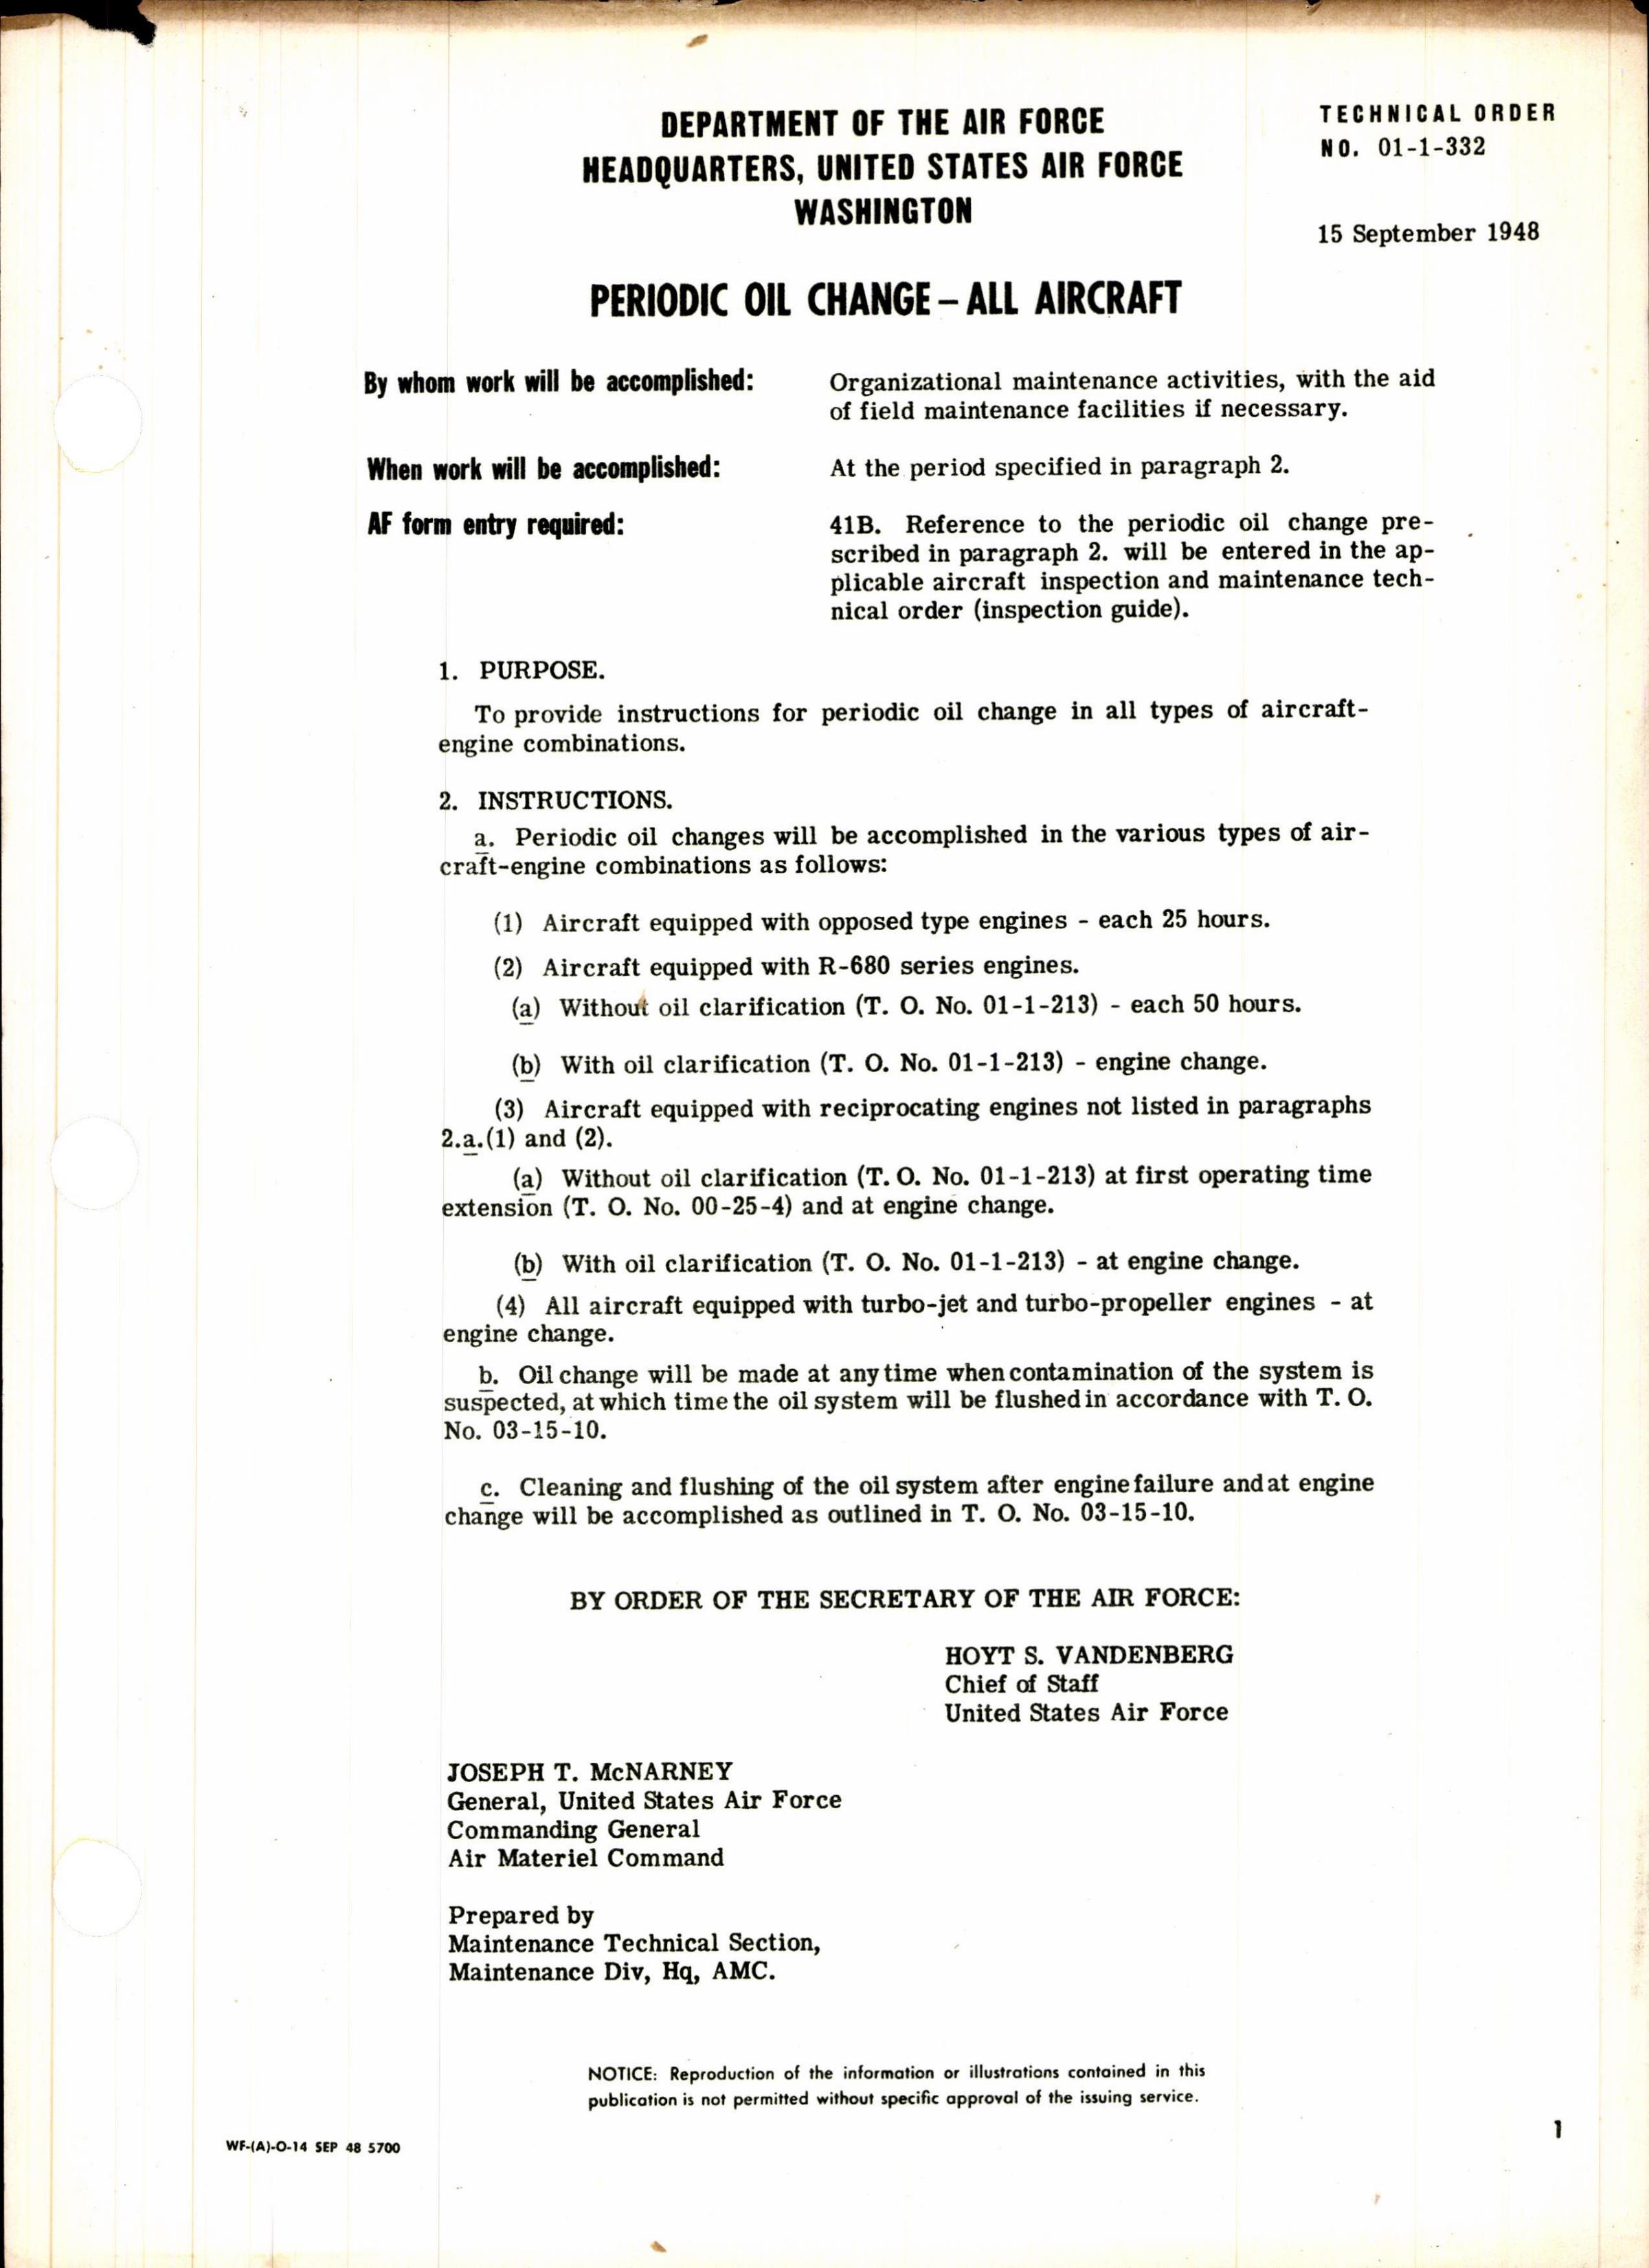 Sample page 1 from AirCorps Library document: Periodic Oil Change for All Aircraft